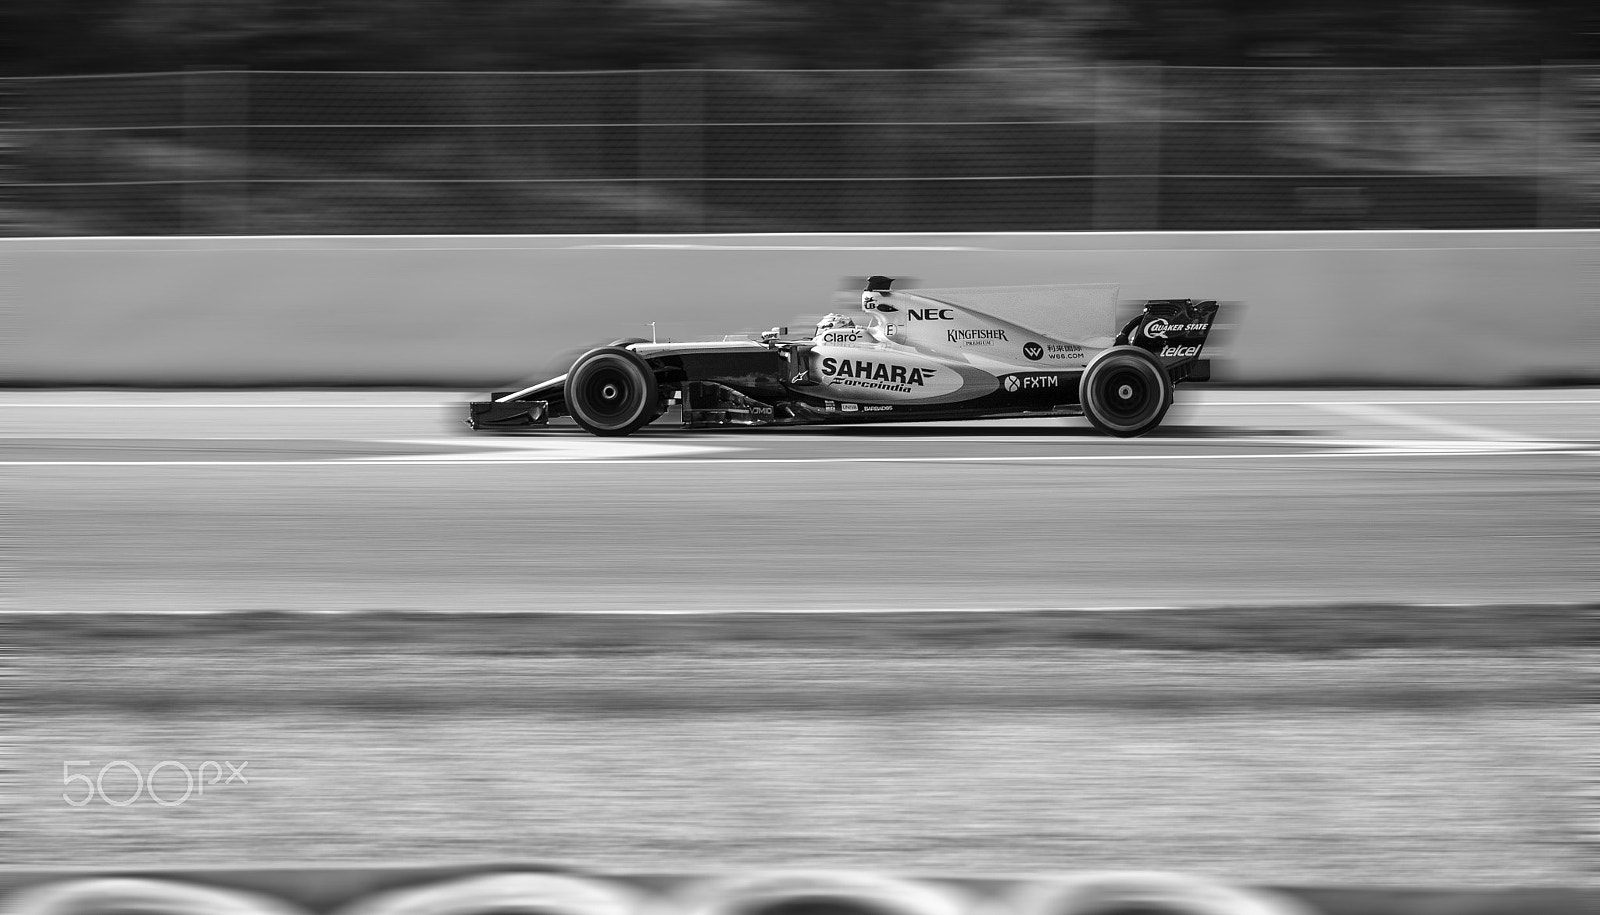 Sony a7 sample photo. Forceindia f1 photography